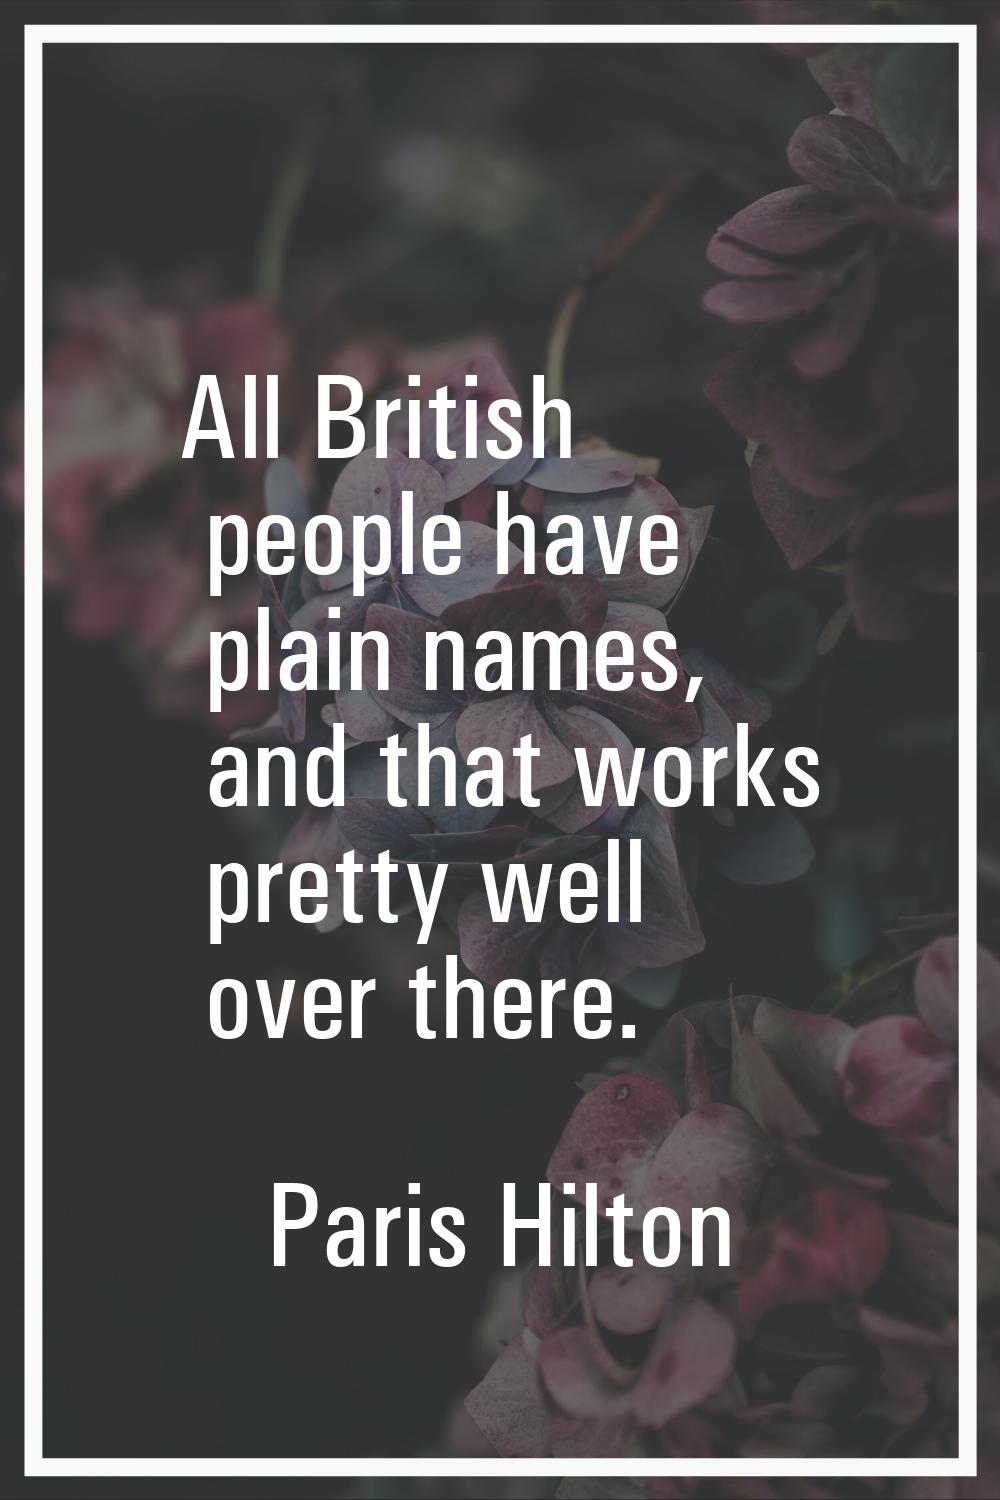 All British people have plain names, and that works pretty well over there.